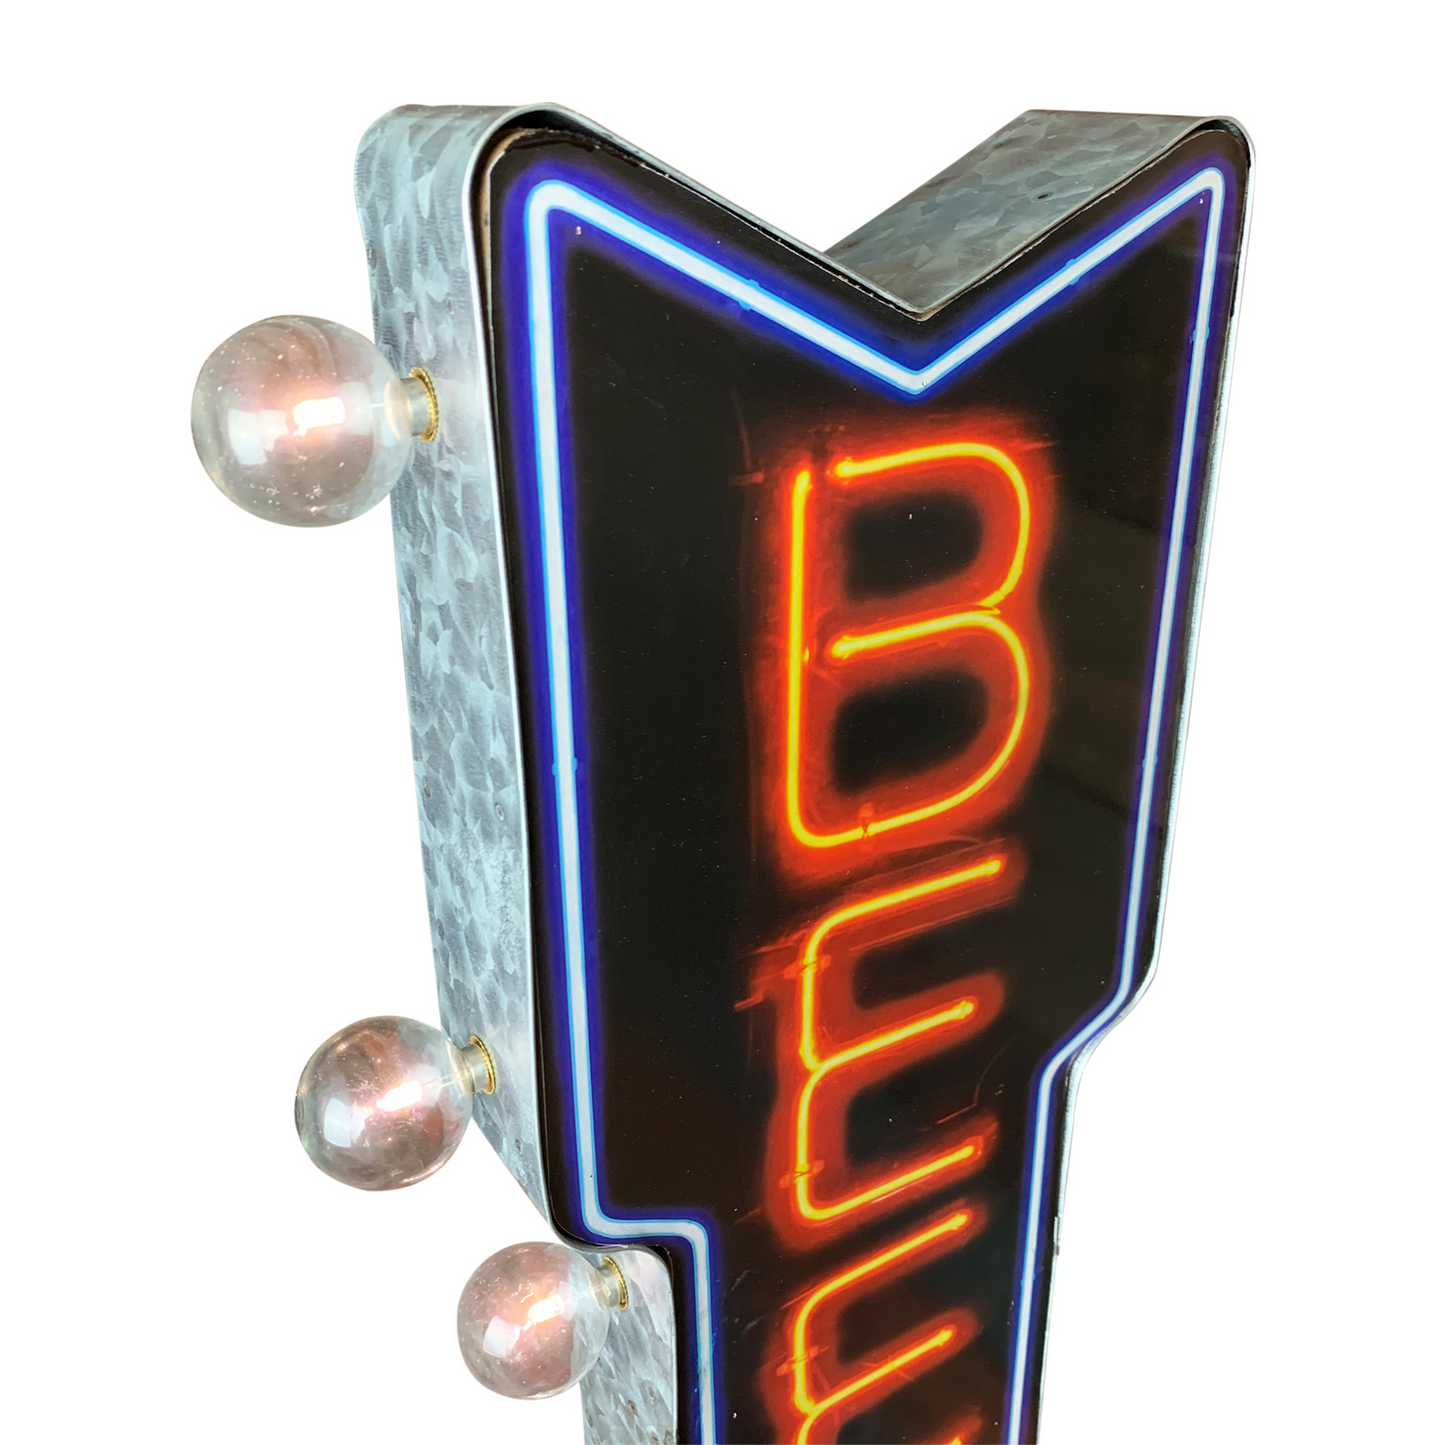 Beer On Tap Neon Print LED Arrow Sign